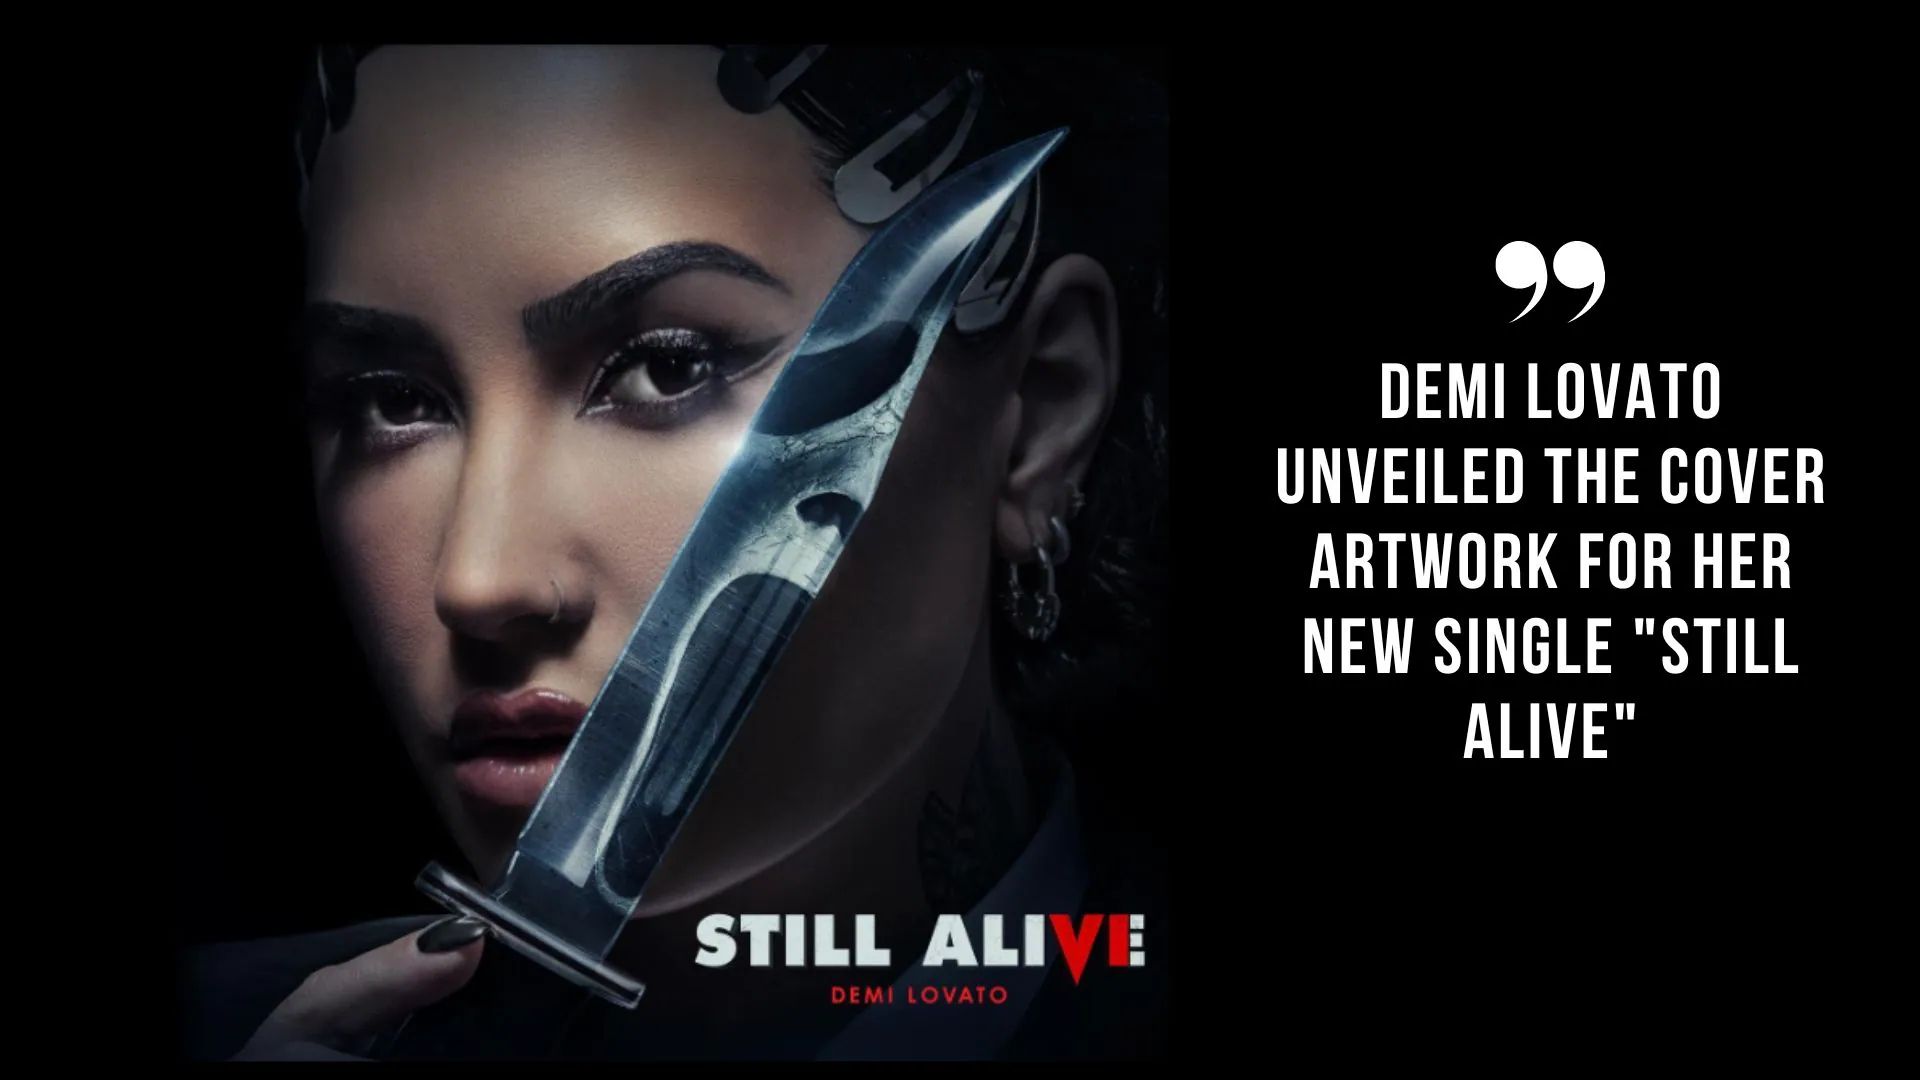 Demi Lovato unveiled the cover artwork for her new single Still Alive (Image credit: Instagram)